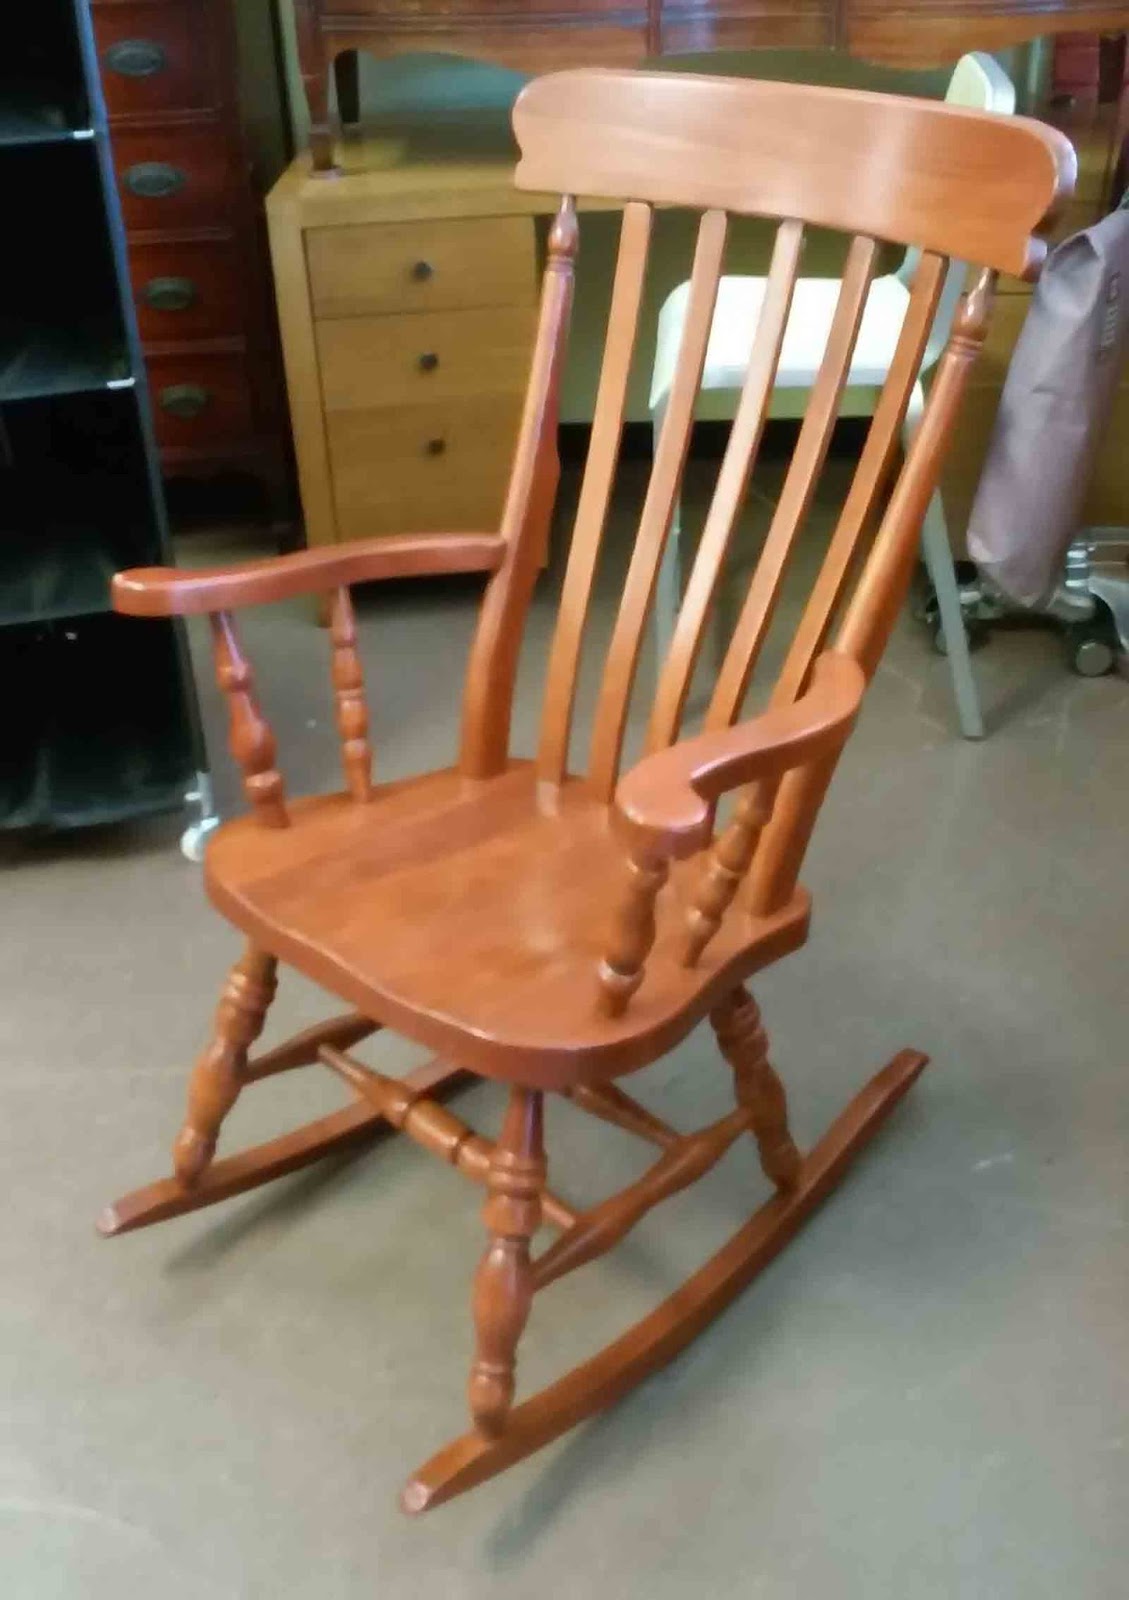 UHURU FURNITURE & COLLECTIBLES: SOLD Solid Wood Rocking Chair - $70